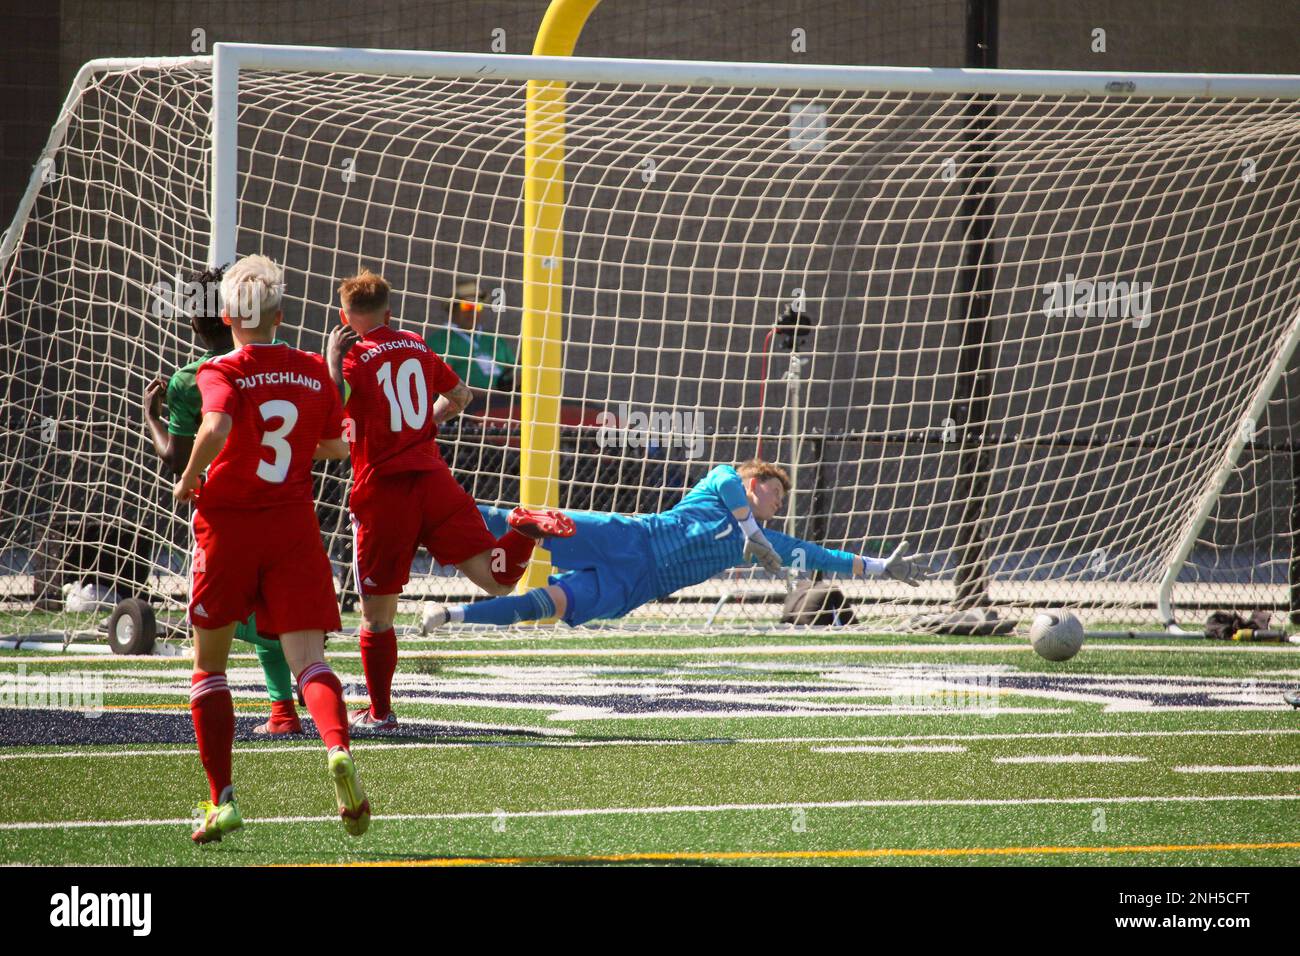 Cameroon's Ebika Tabe scores past the diving German goalkeeper, Gina-Marie Mitschke in match 13 of the 13th Conseil International du Sport Militaire (CISM) World Women's Military Football Championship hosted by Fairchild Air Force Base in Spokane, Washingon.  This year's championship features teams from the United States, Belgium, Cameroon, Canada, France, Germany, Ireland, Mali, Netherlands, and South Korea.  (Department of Defense Photo by Mr. Steven Dinote, released). Stock Photo